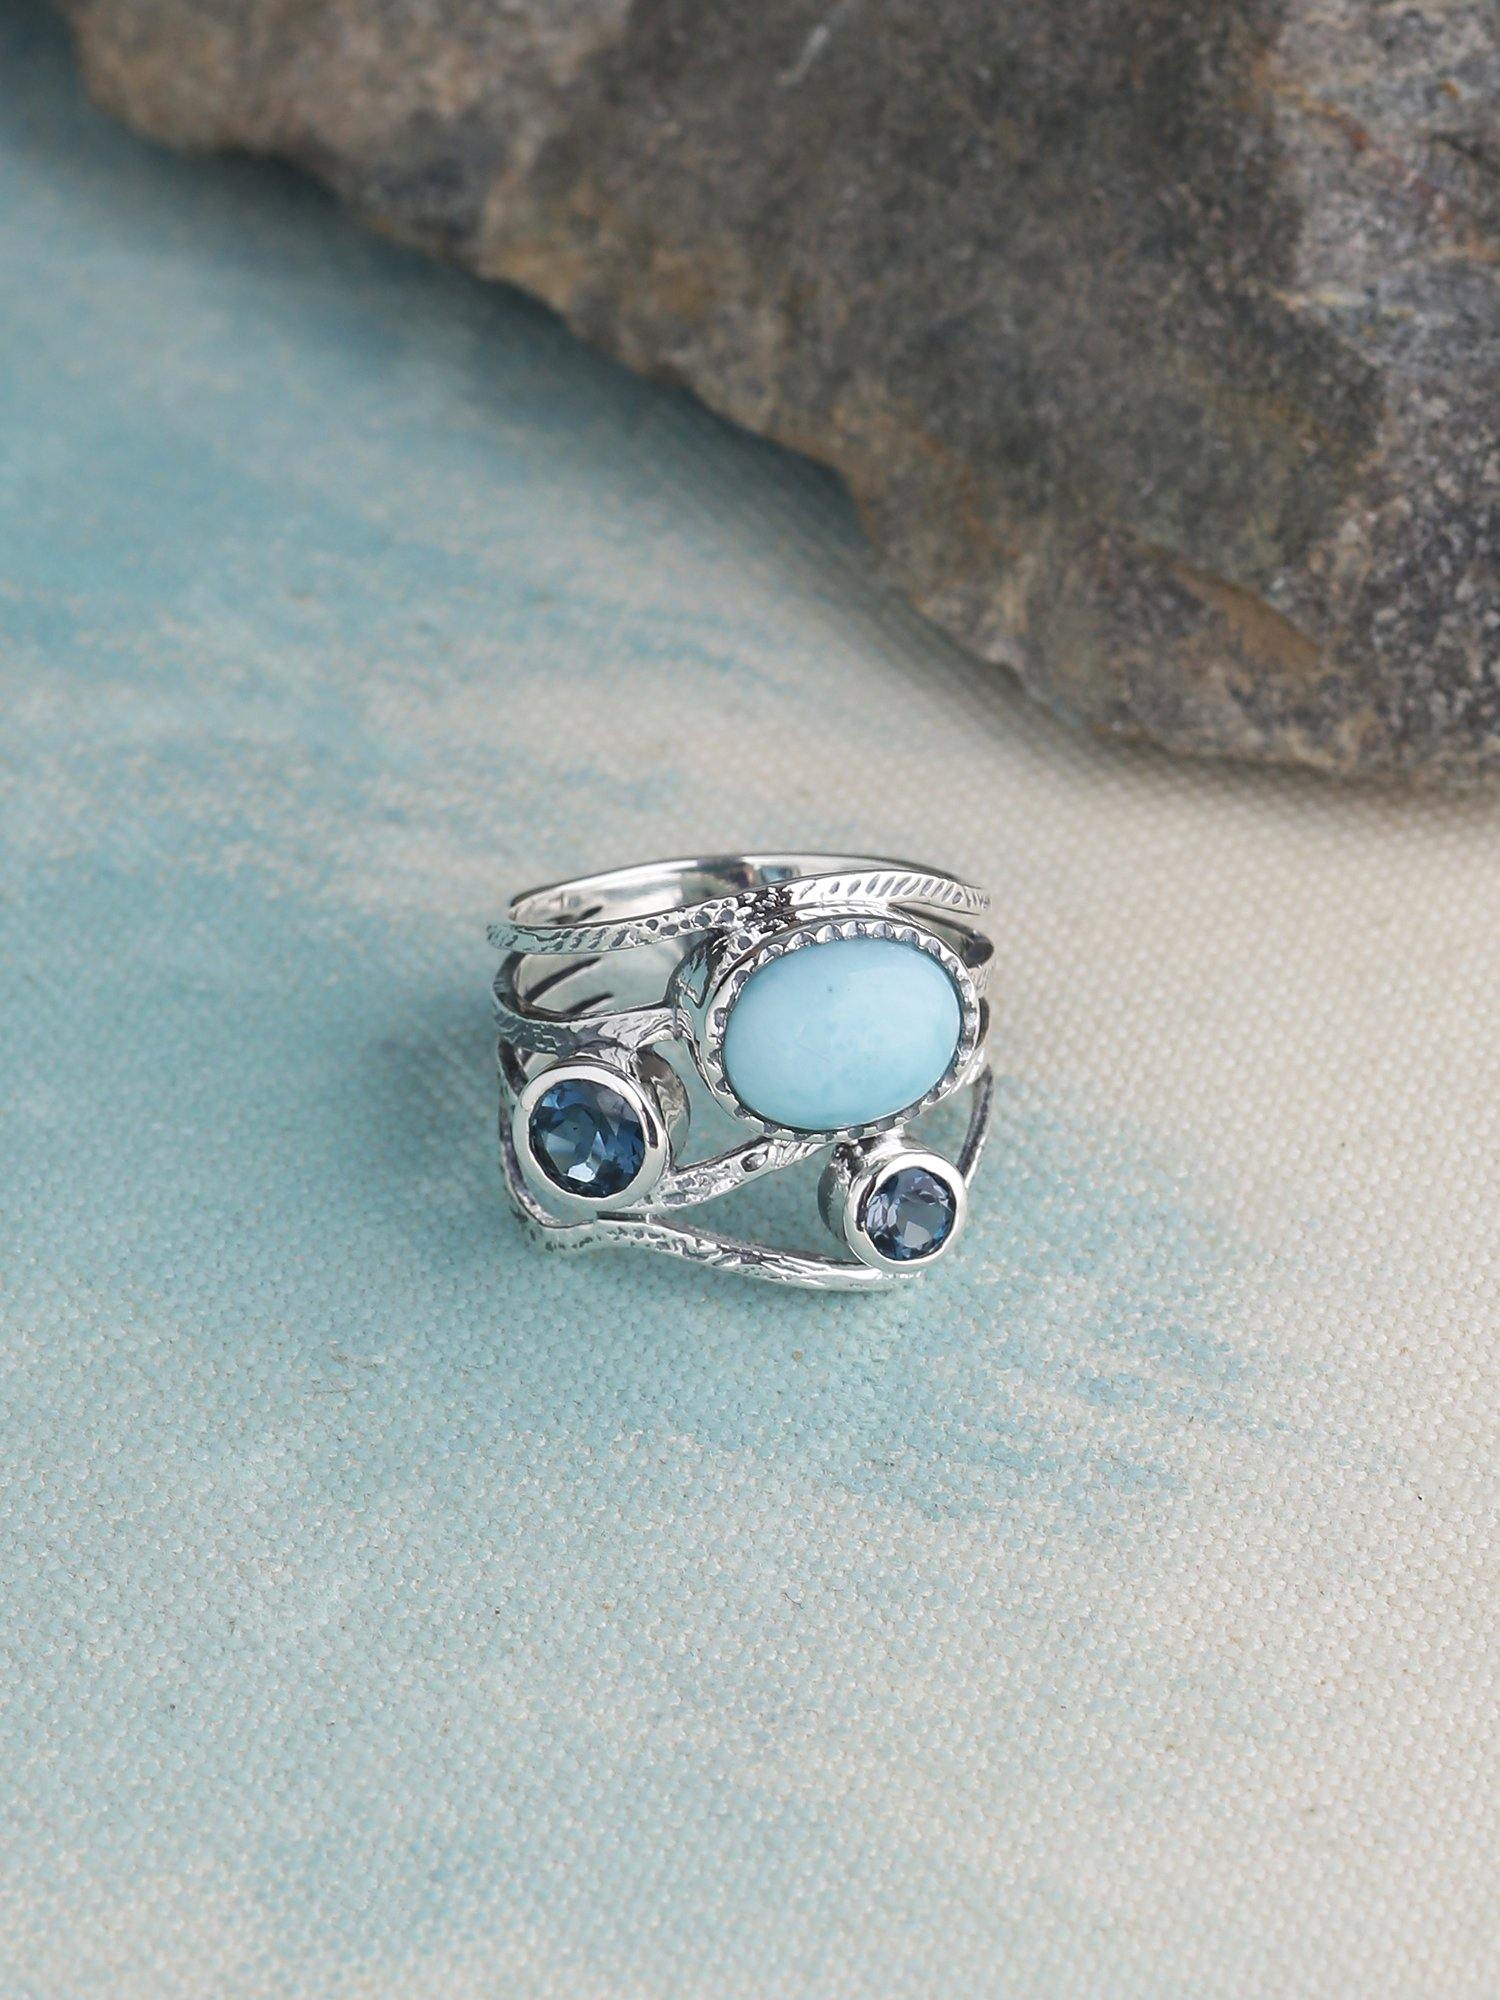 Larimar London Blue Topaz Solid 925 Sterling Silver Designer Bypass Ring Jewelry - YoTreasure